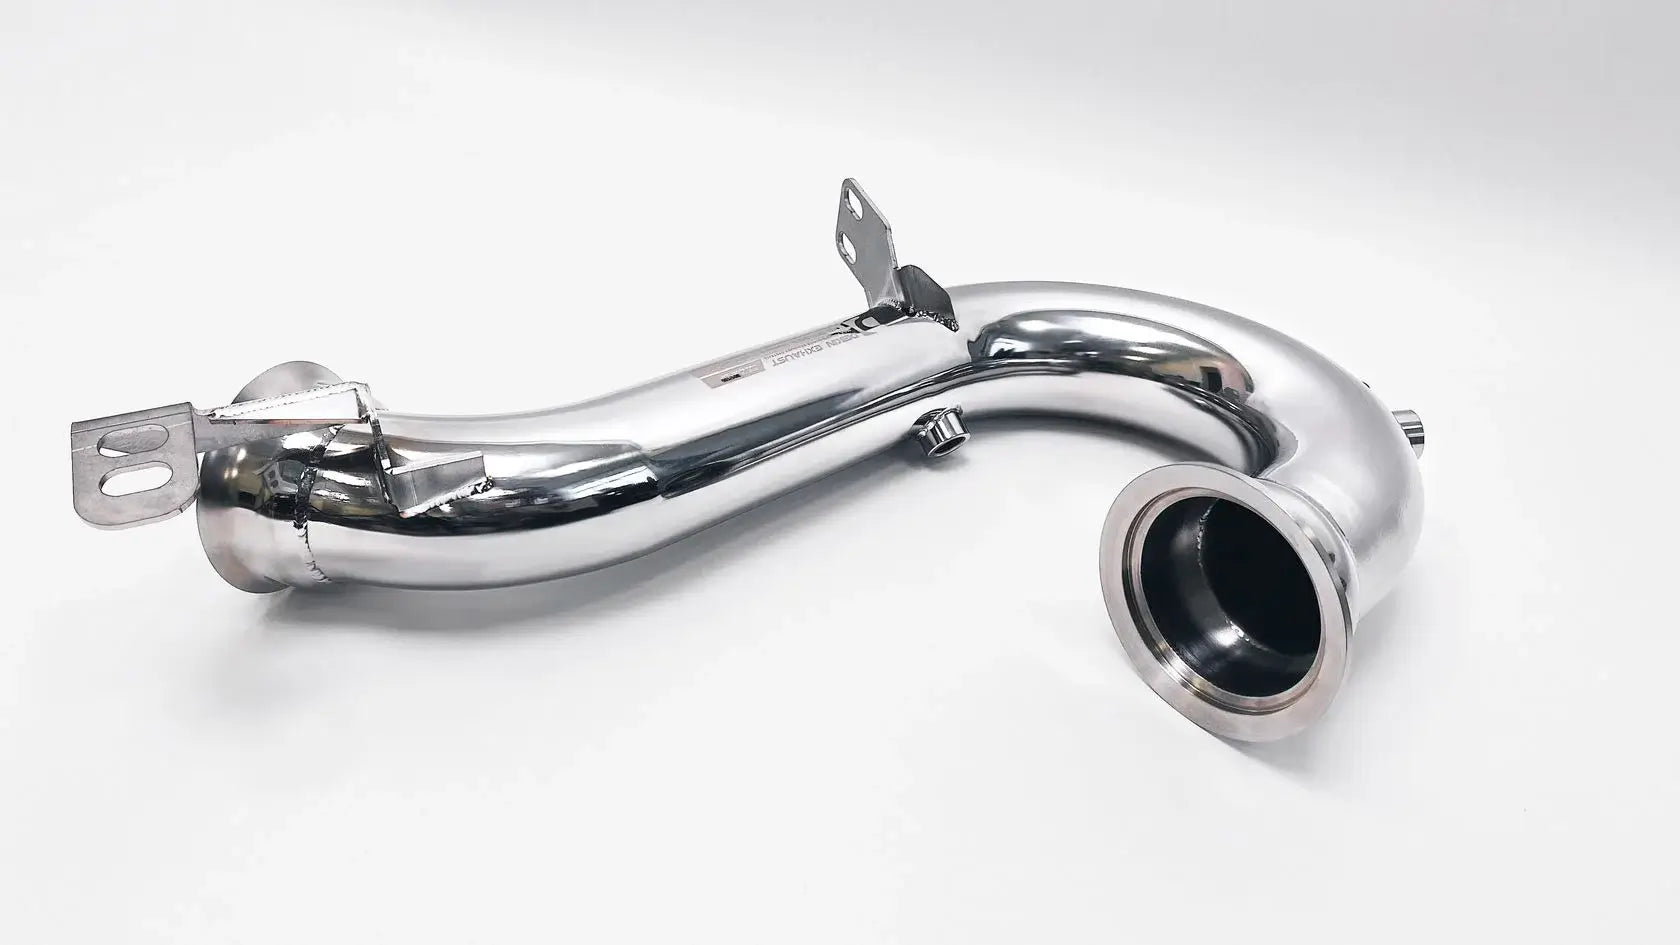 DEIKIN 10-MB.GLE53.V167-DPT Downpipe for Mercedes-AMG GLE53 (V167) with thermal insulation HeatShield Photo-0 